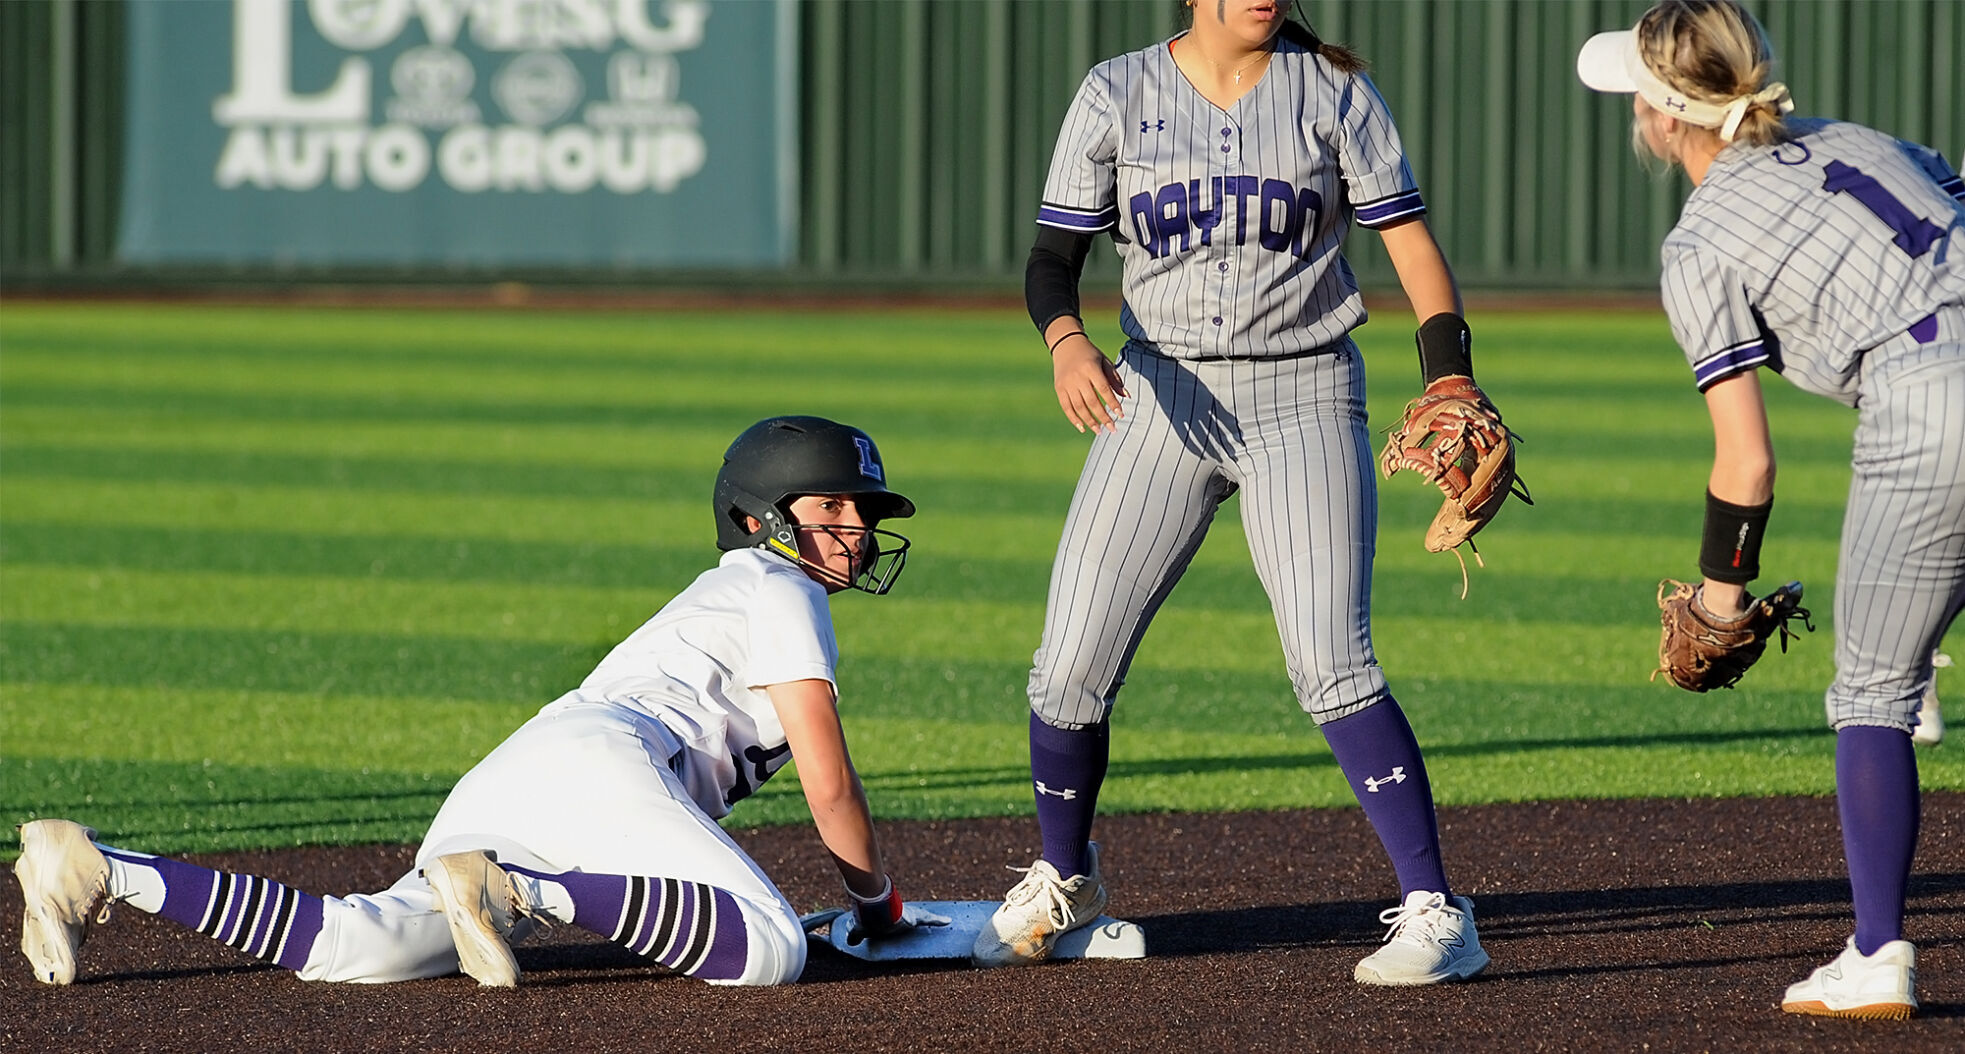 Lady Panthers tame Lady Broncos, 11-4